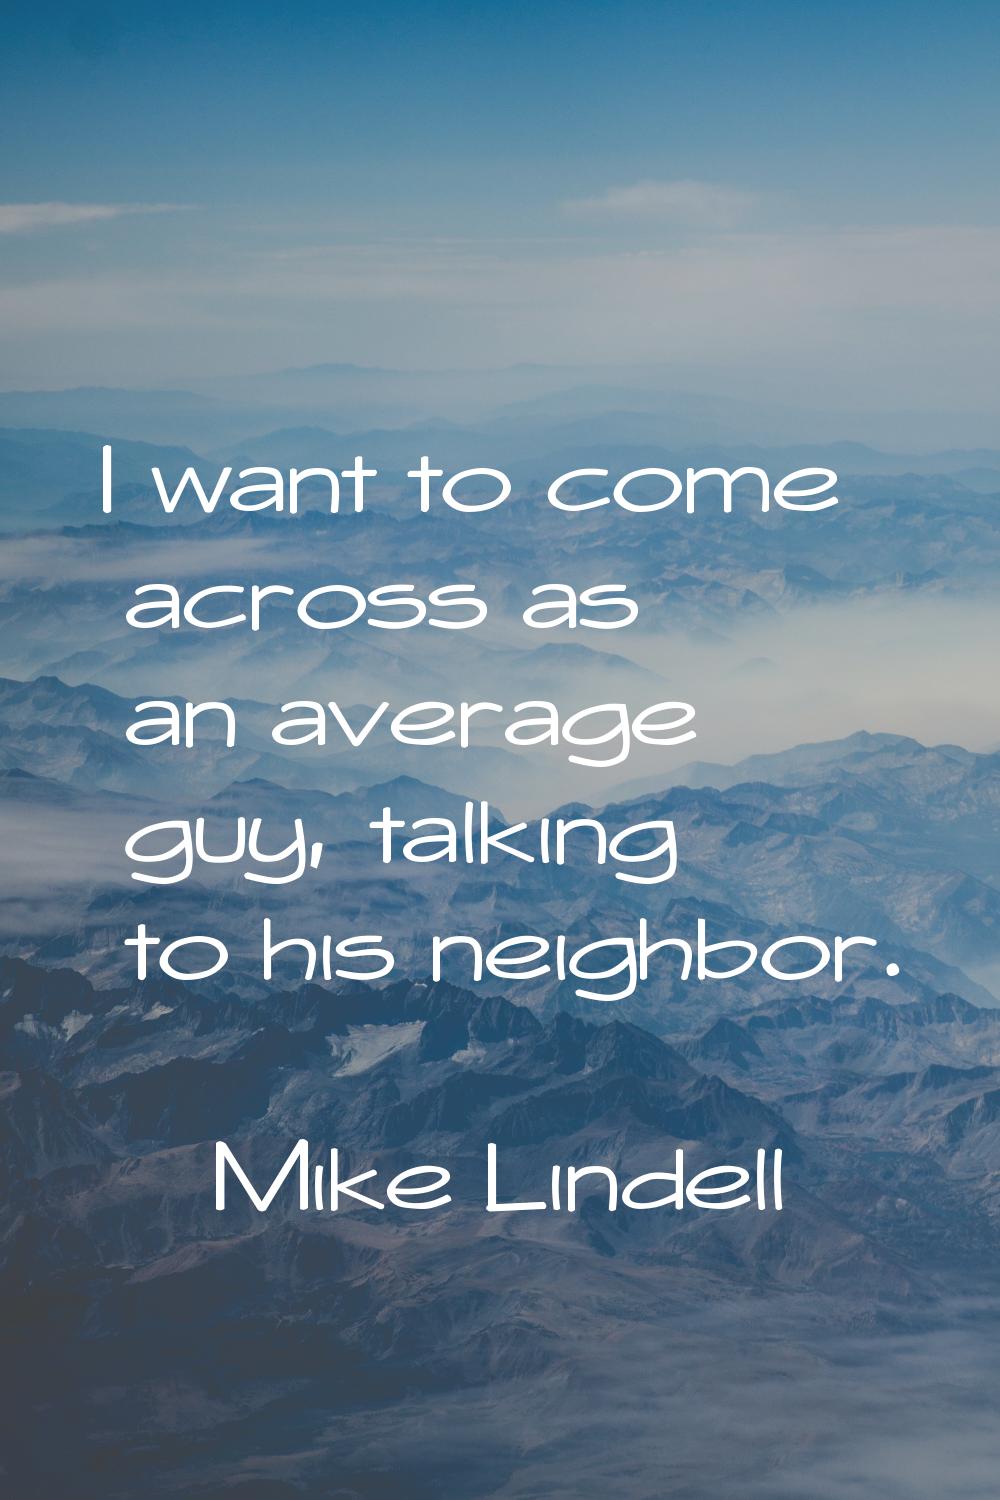 I want to come across as an average guy, talking to his neighbor.